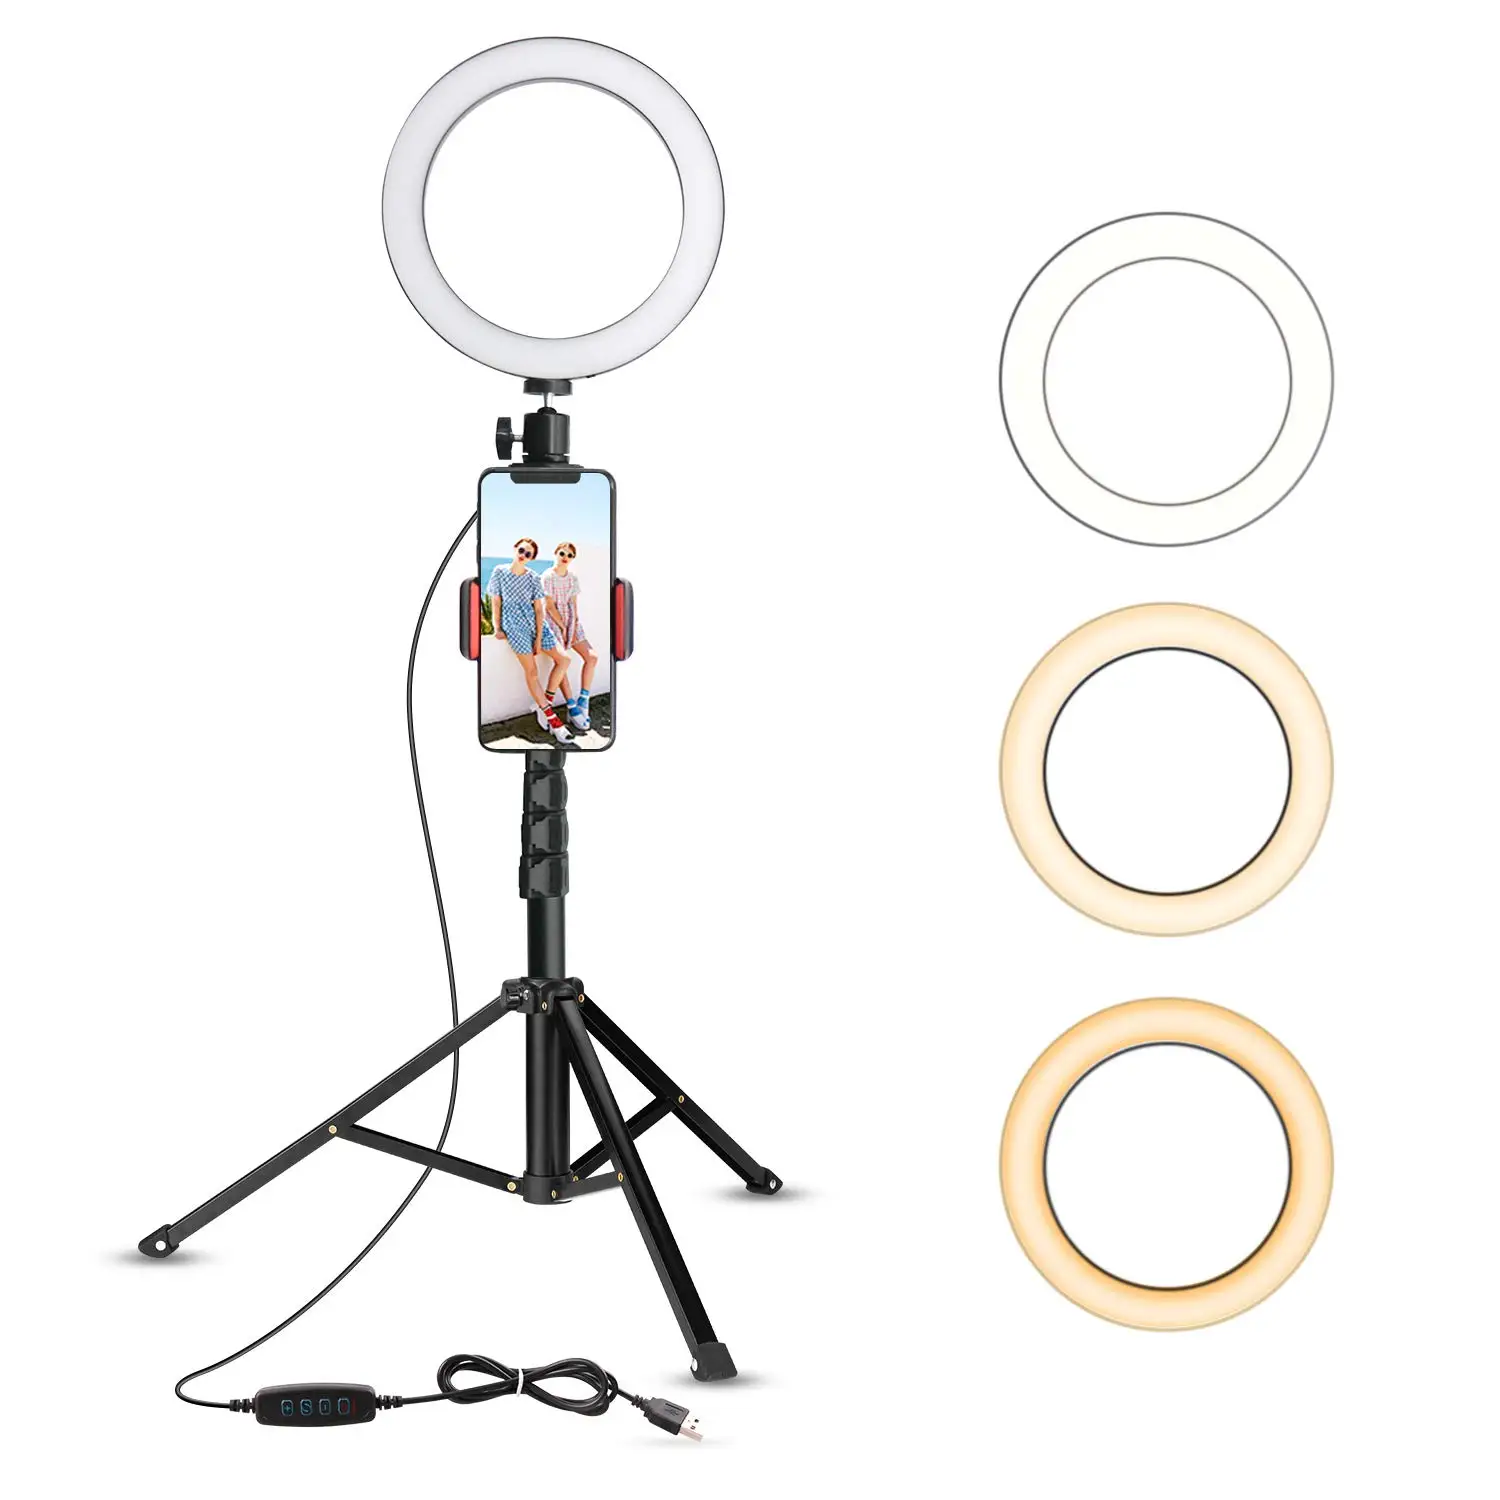 Dimmable Desktop Makeup Ring Light for YouTube Video/Live Stream with 3 Light Modes and 10 Brightness Levels for Photography/TikTok Arvnka 8 LED Selfie Ring Light with Tripod Stand 